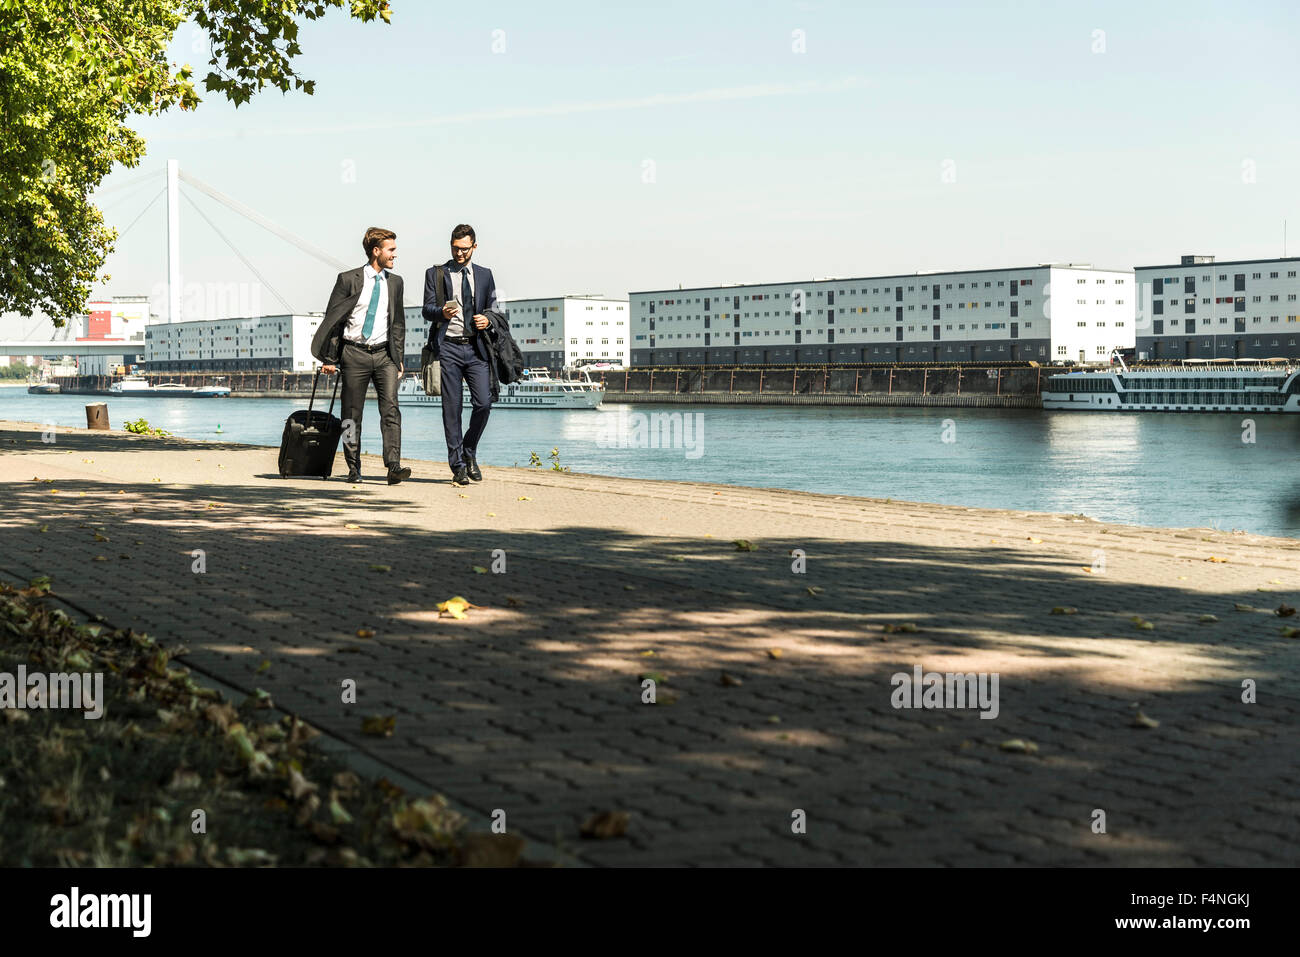 Two young businessmen on a business trip, walking by river Stock Photo